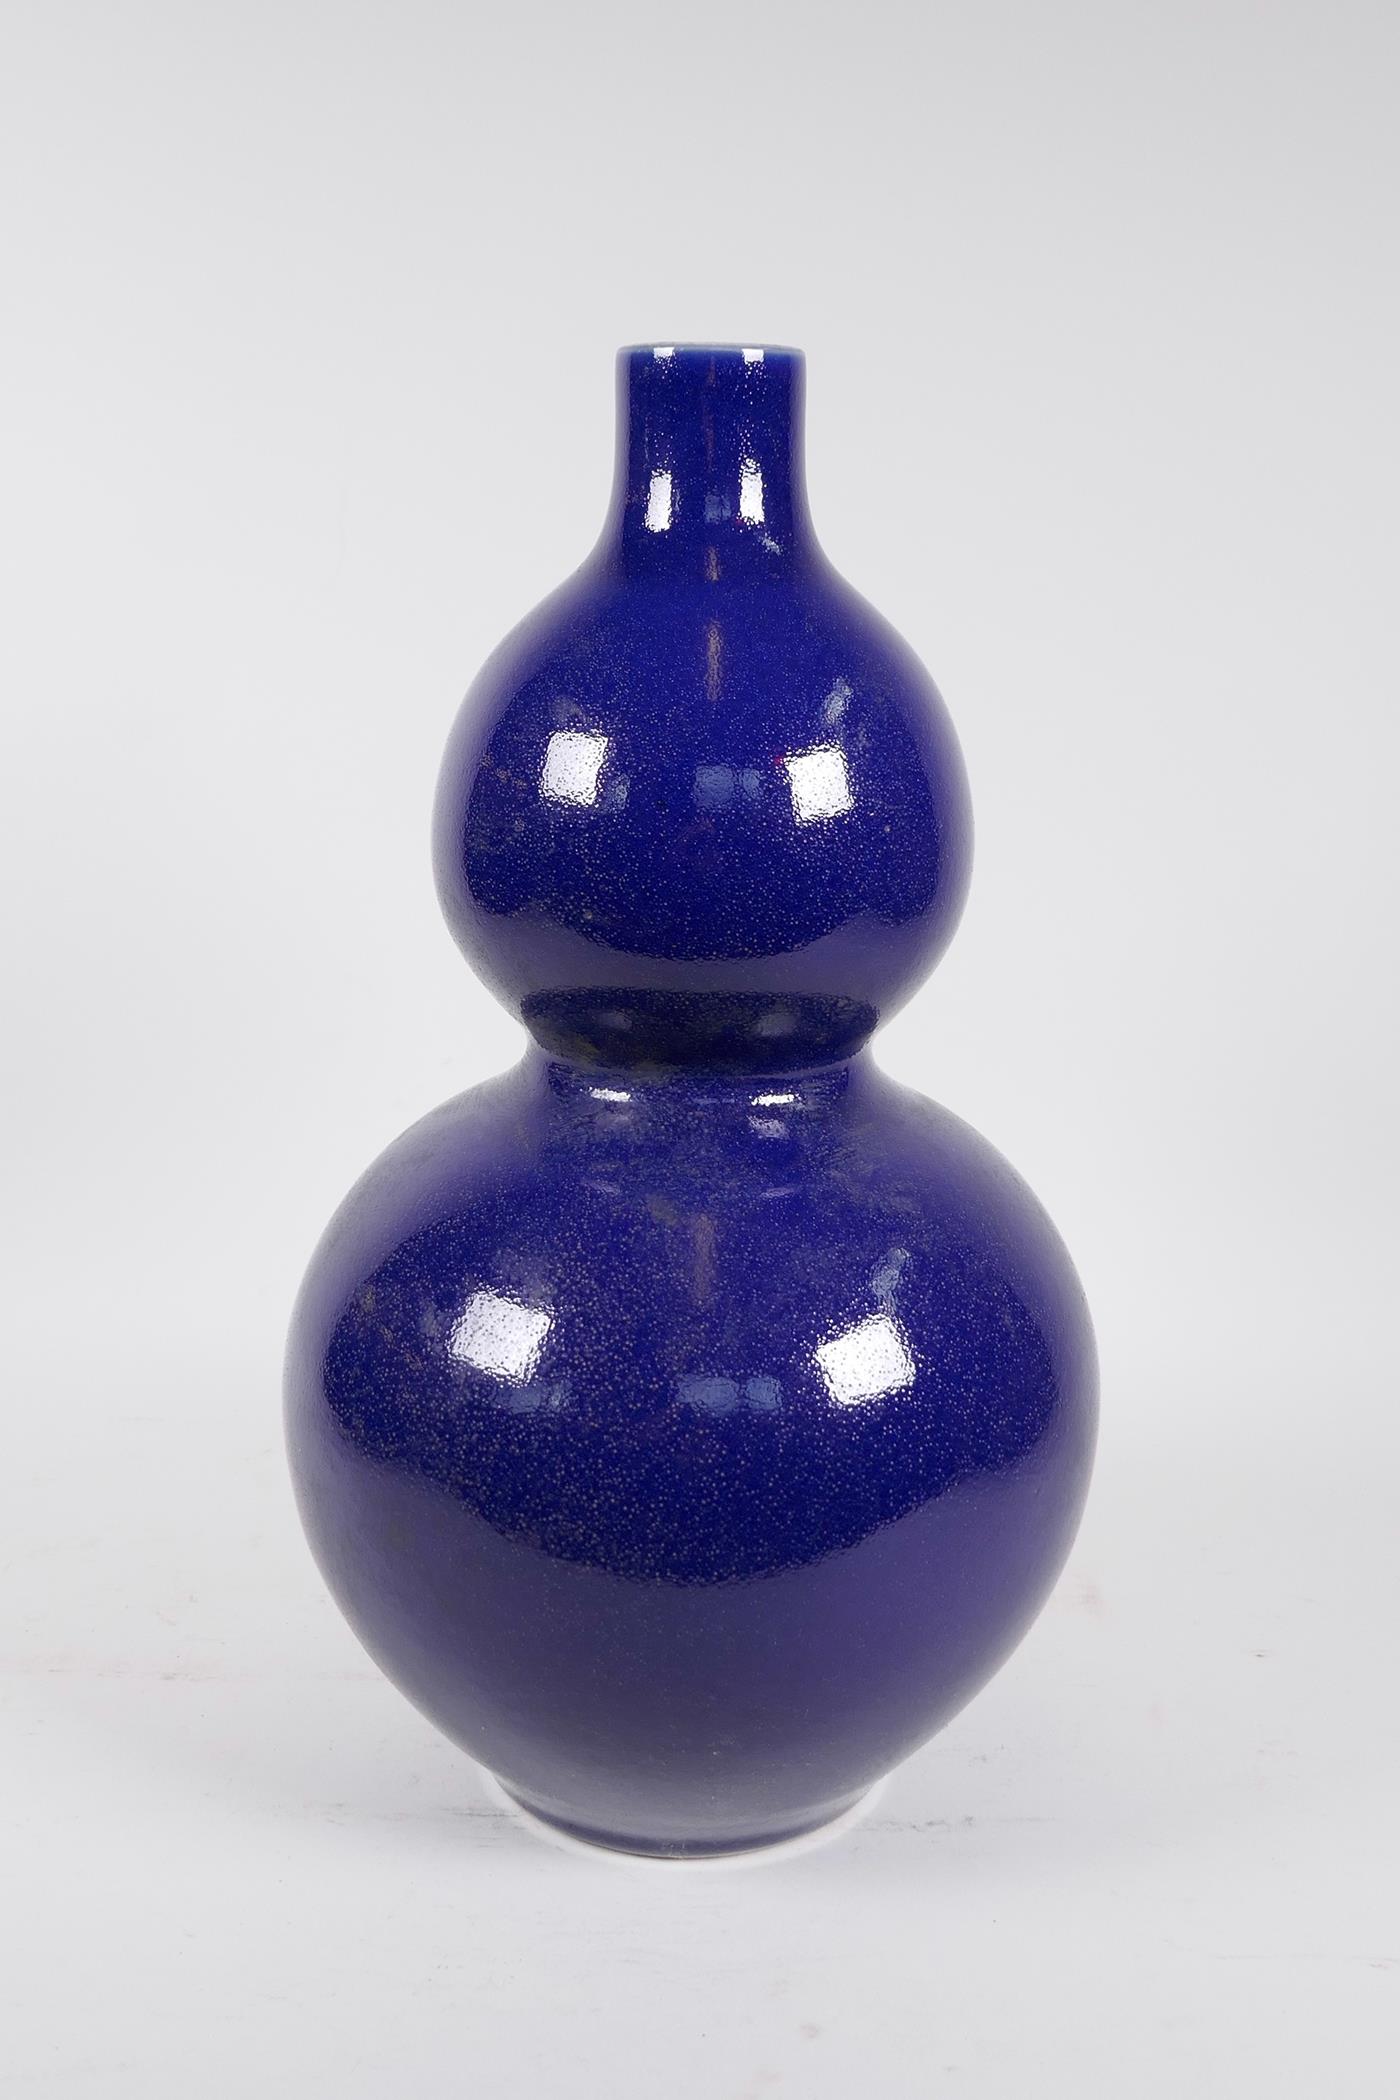 A Chinese powder blue glazed porcelain double gourd vase, 6 character mark to base, 14½" high - Image 3 of 4